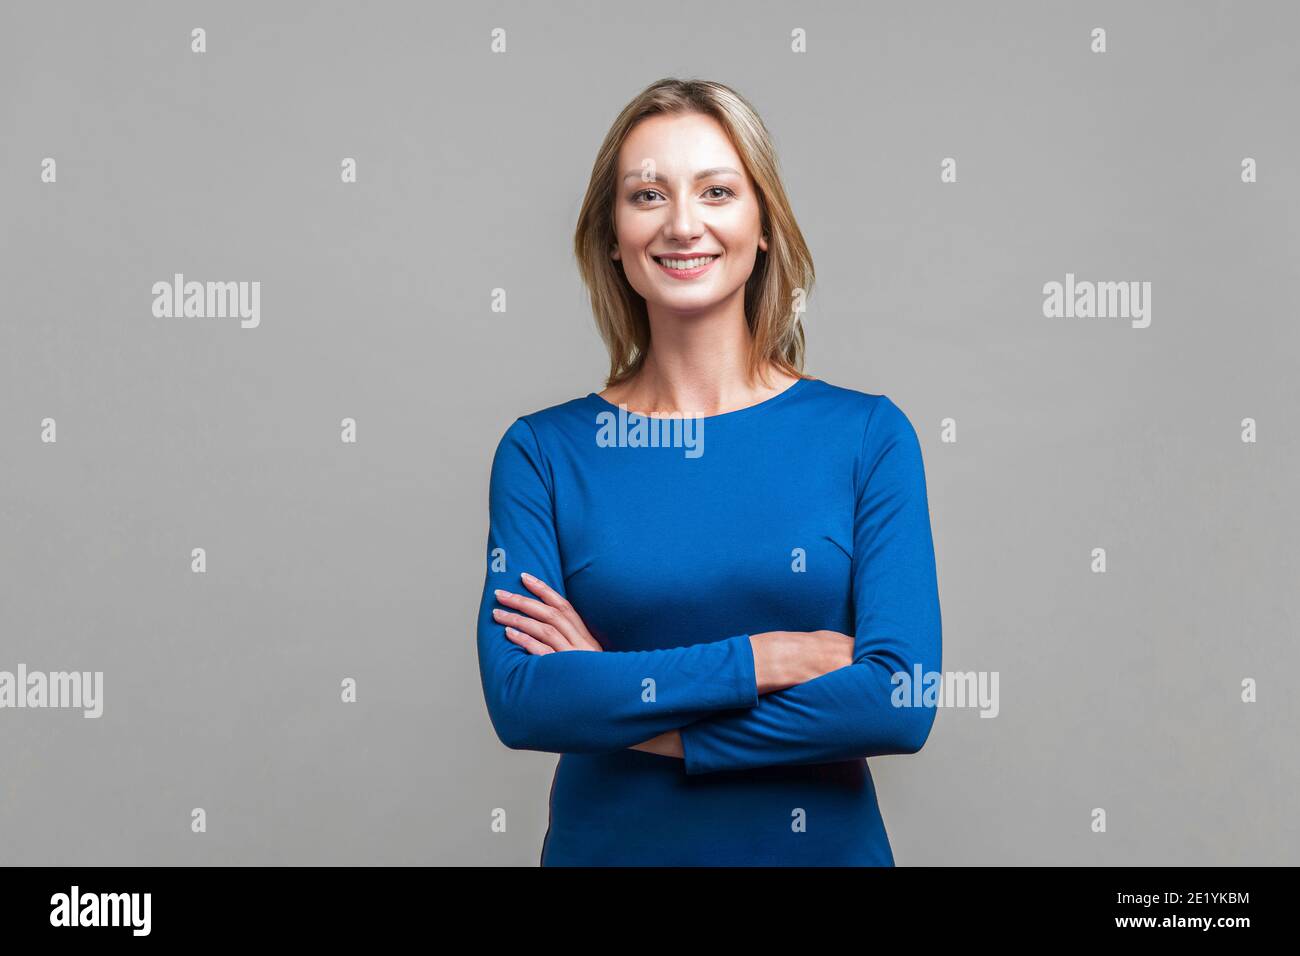 Portrait of happy successful businesswoman in tight blue dress standing with crossed hands, looking at camera with charming and joyous toothy smile. i Stock Photo